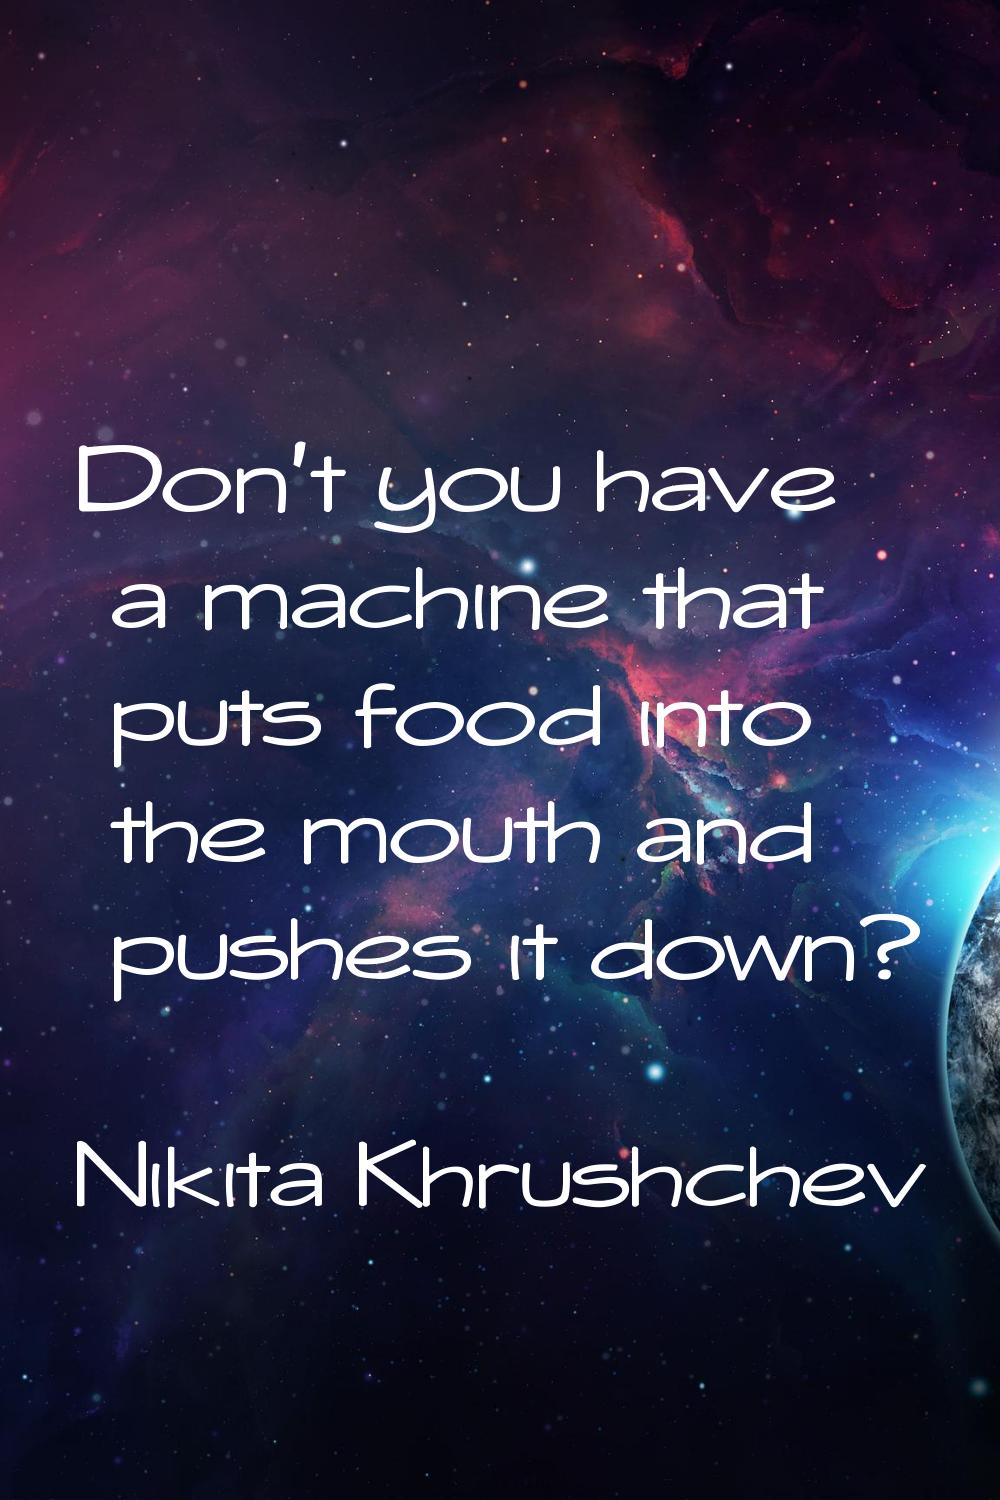 Don't you have a machine that puts food into the mouth and pushes it down?